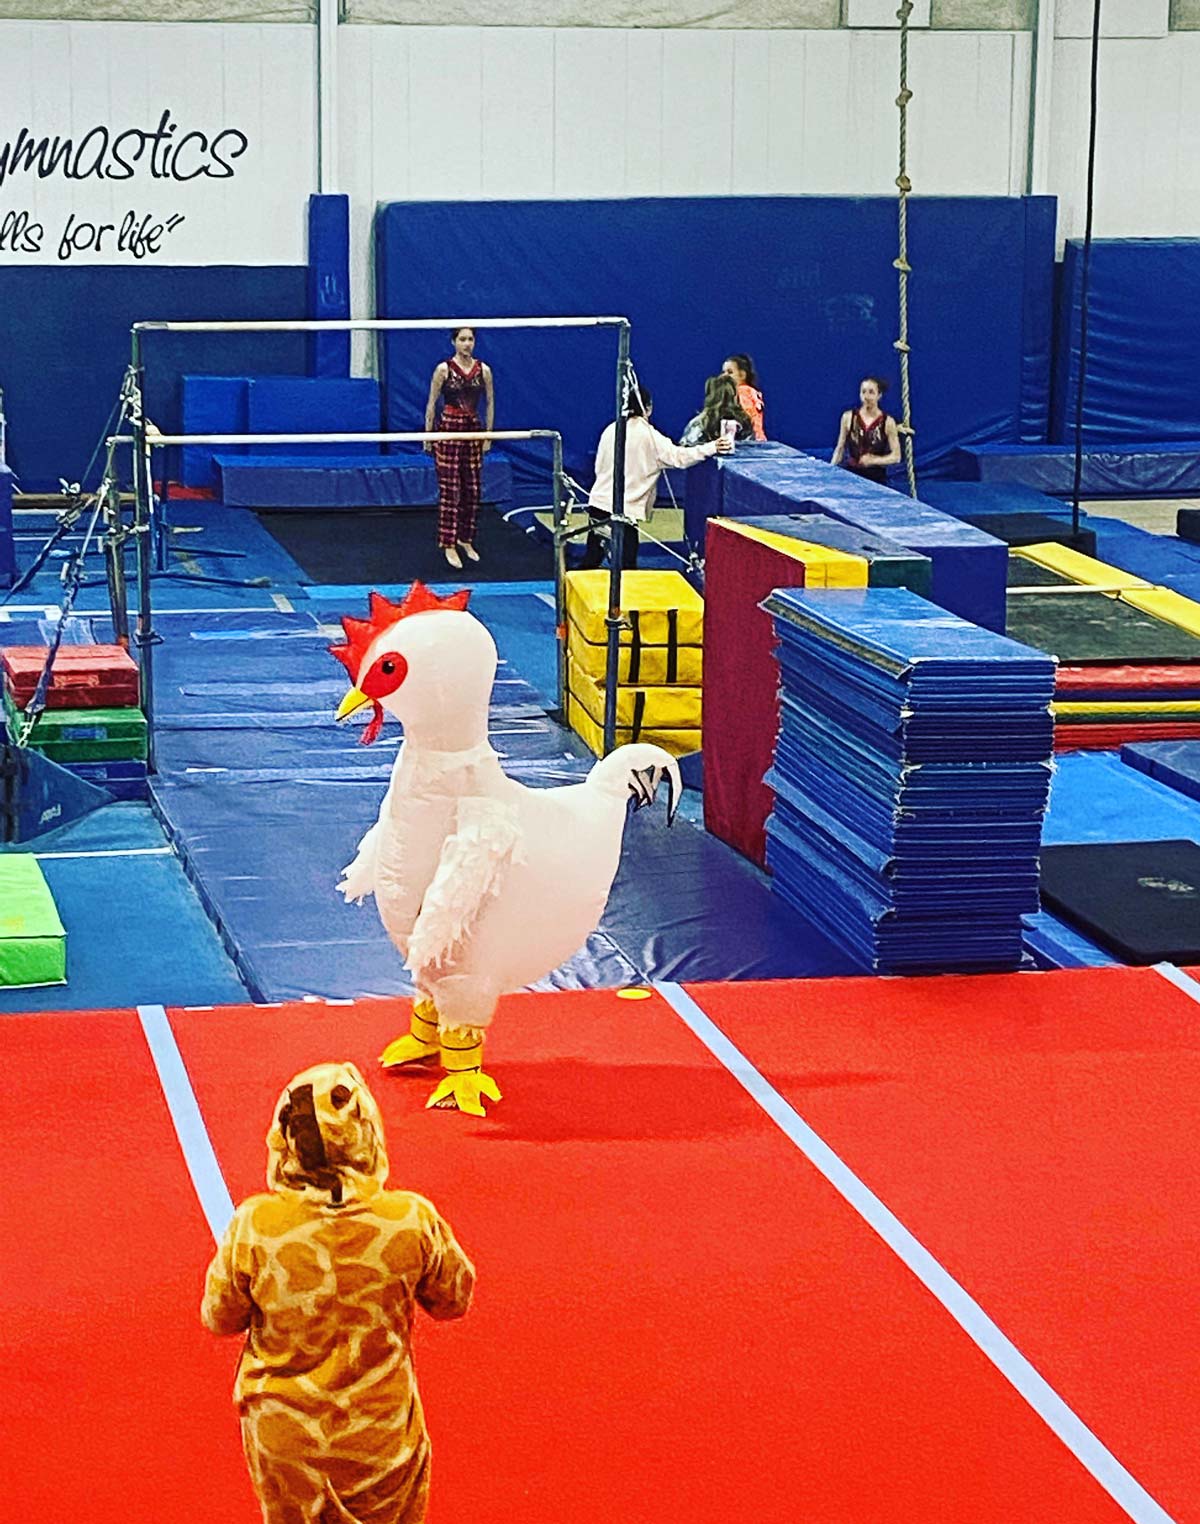 My daughter got to wear a costume during gymnastics practice and this is what she chose. 🐓